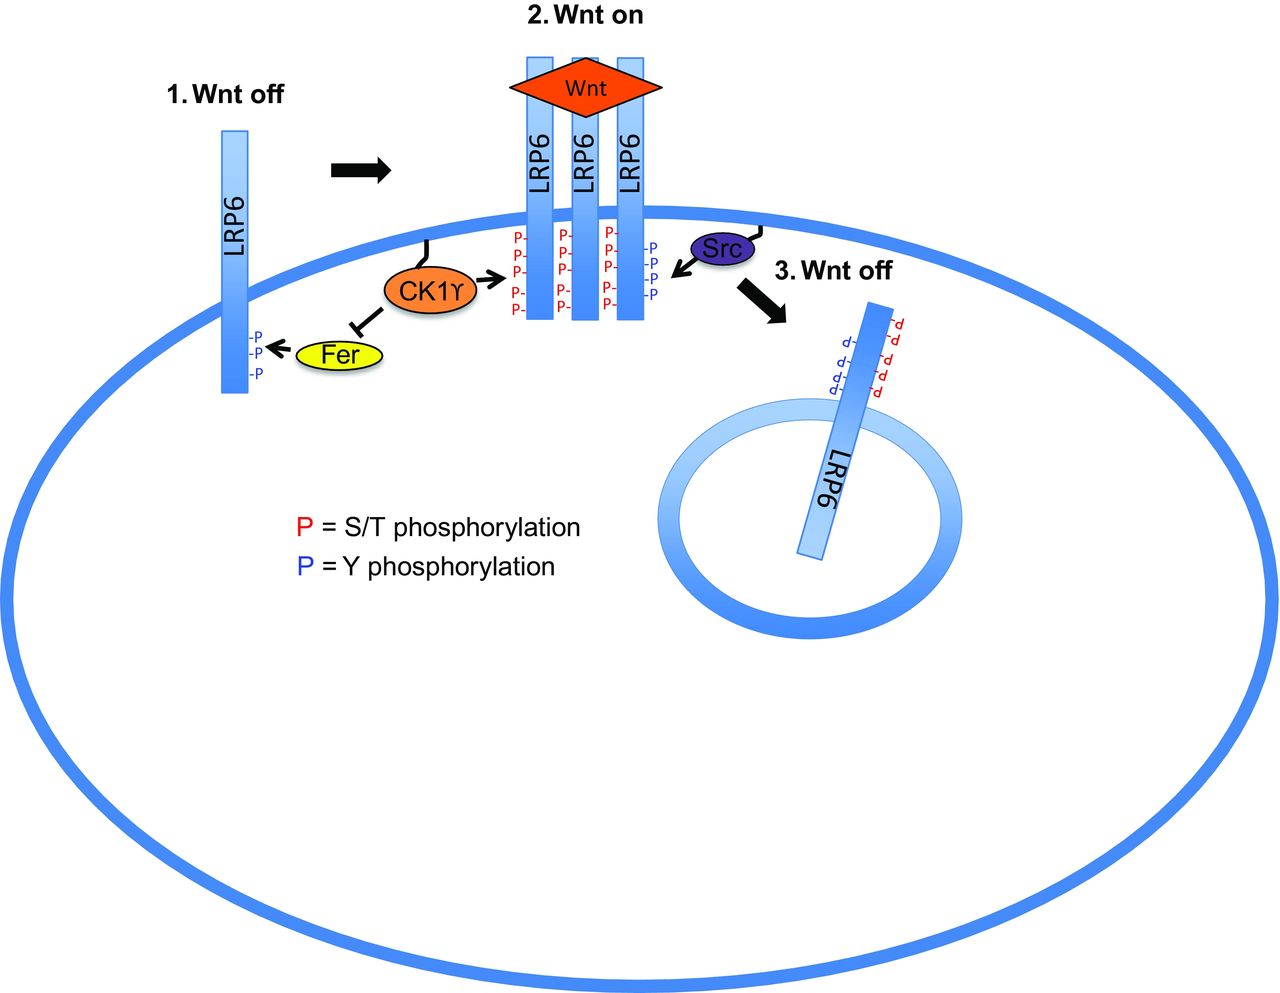 Proposed model for Src- and Fer-mediated LRP6 regulation (Figure 7. in EMBO reports 2014)